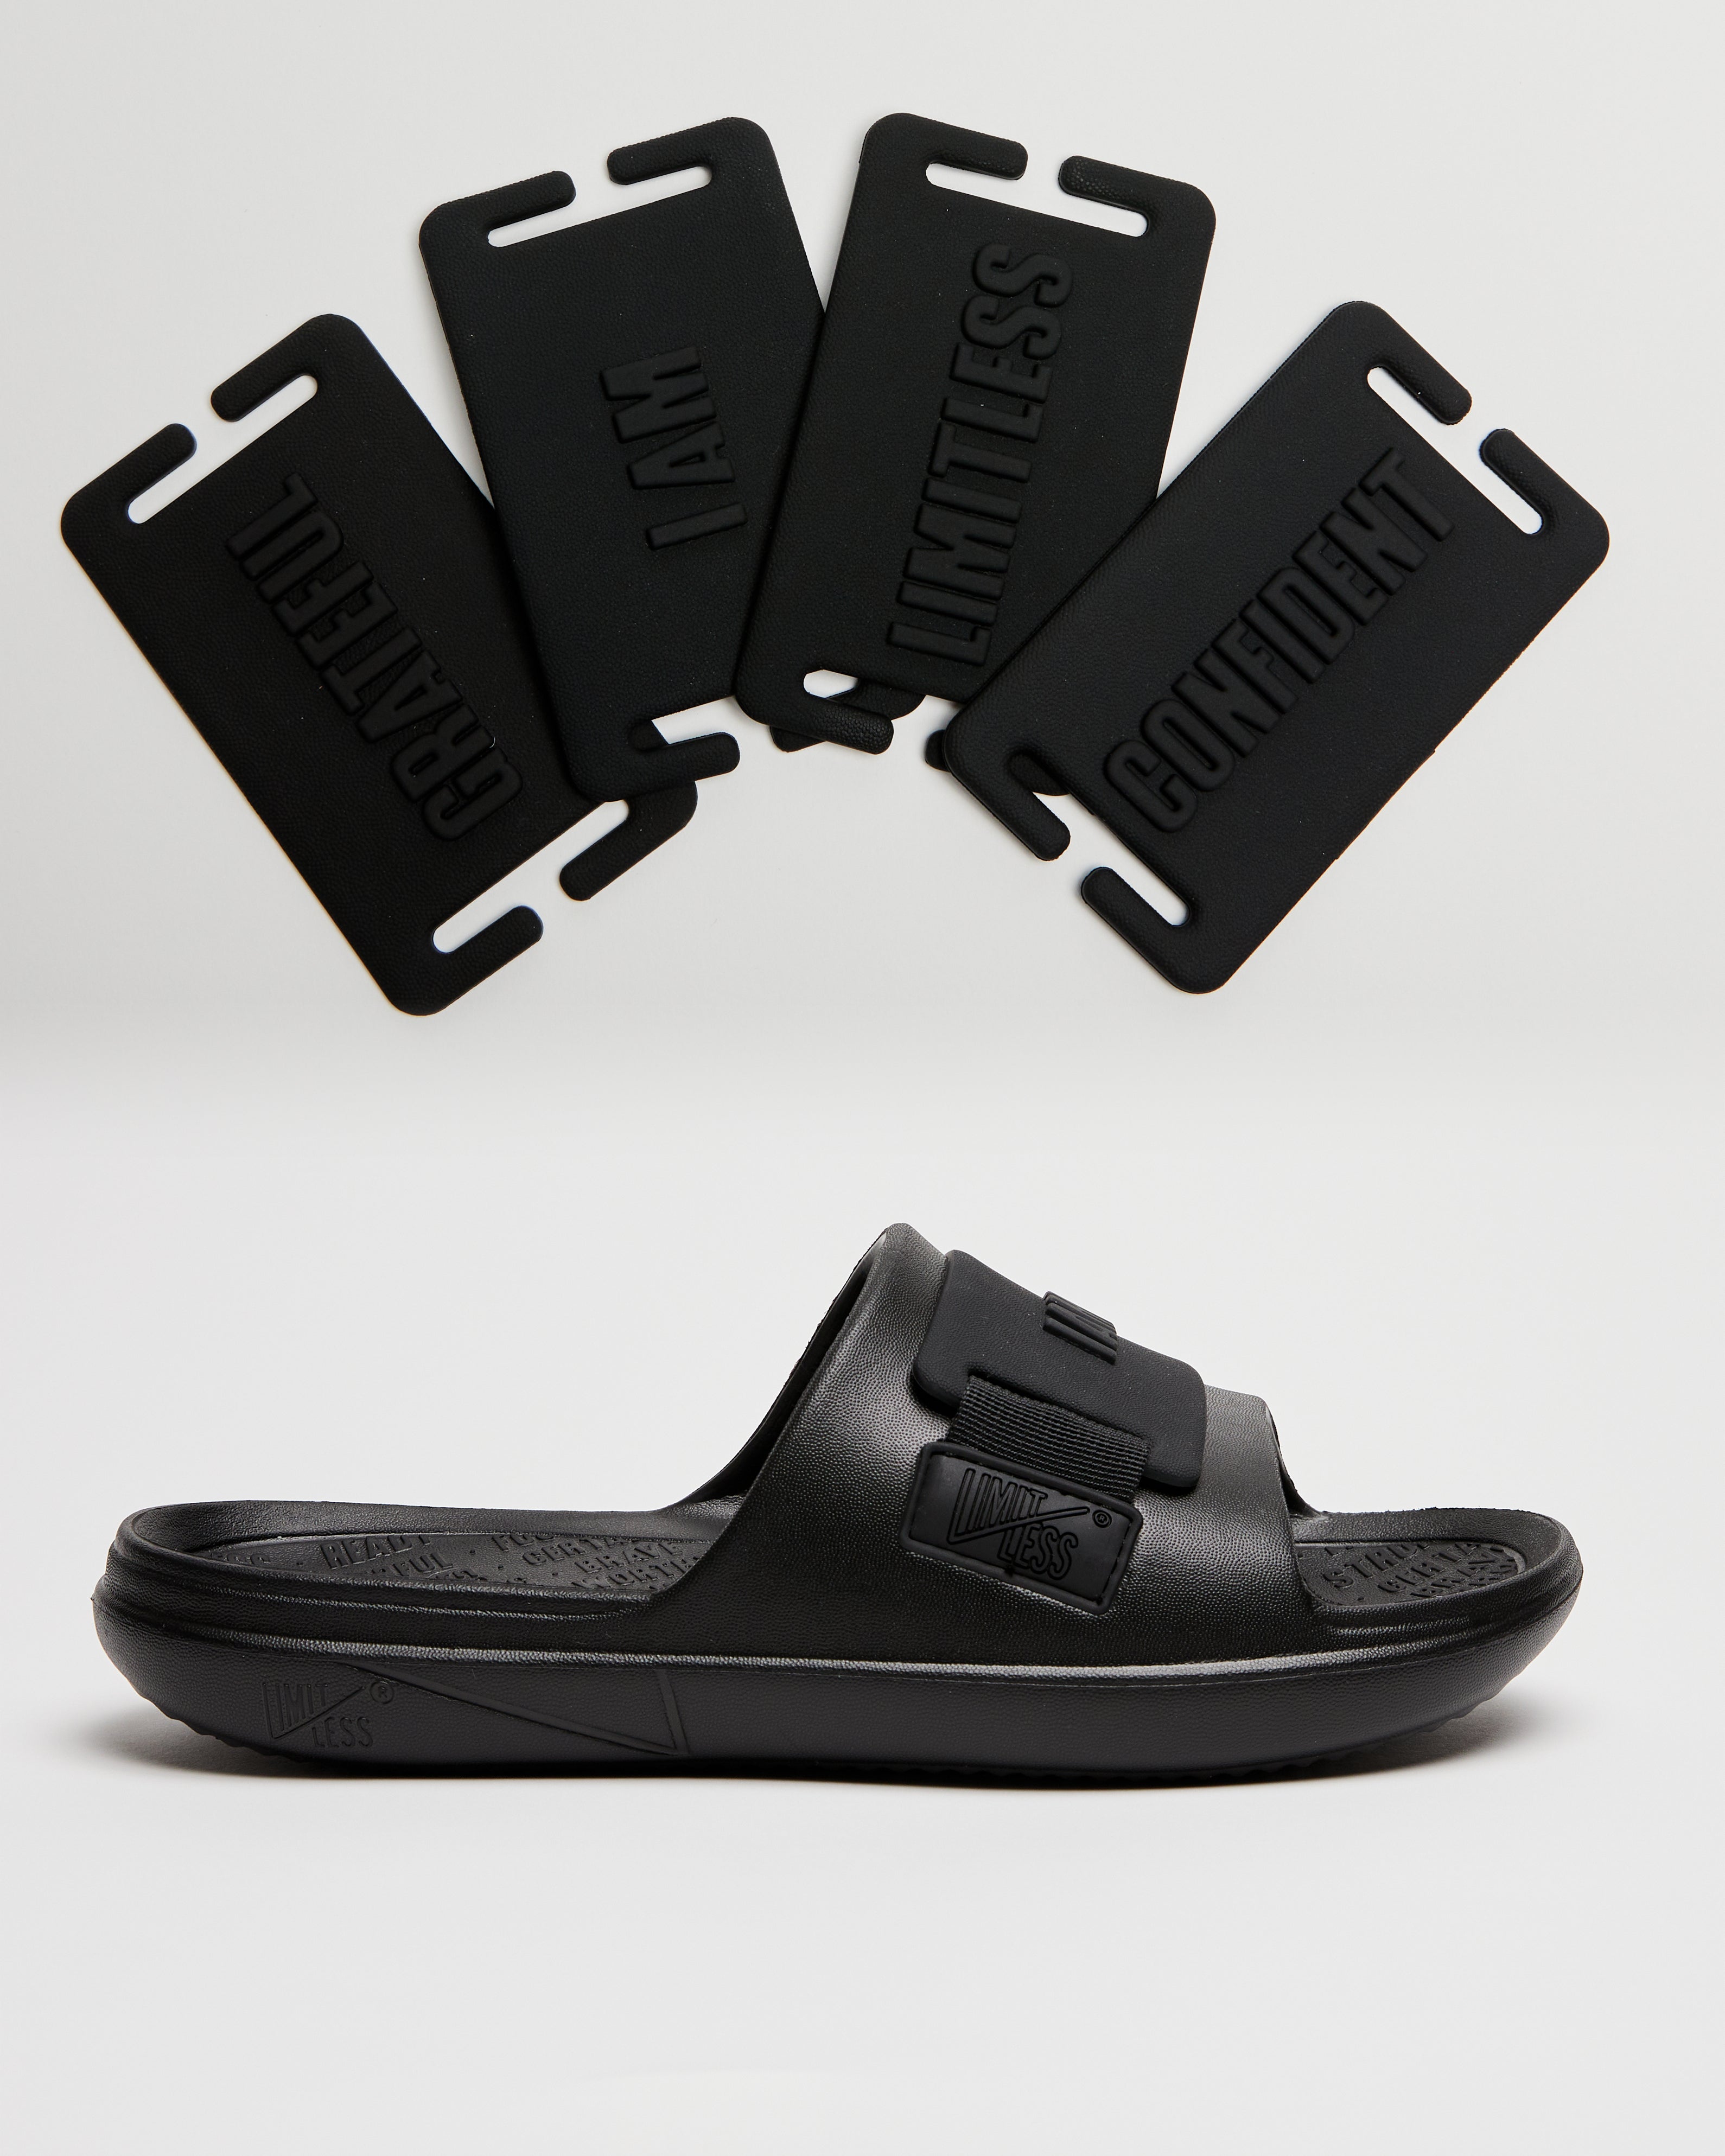 LIMITLESS SLIDES™ WITH ESSENTIAL TIBAH™ QUAD - JUNEAU ALL STARS EDITION